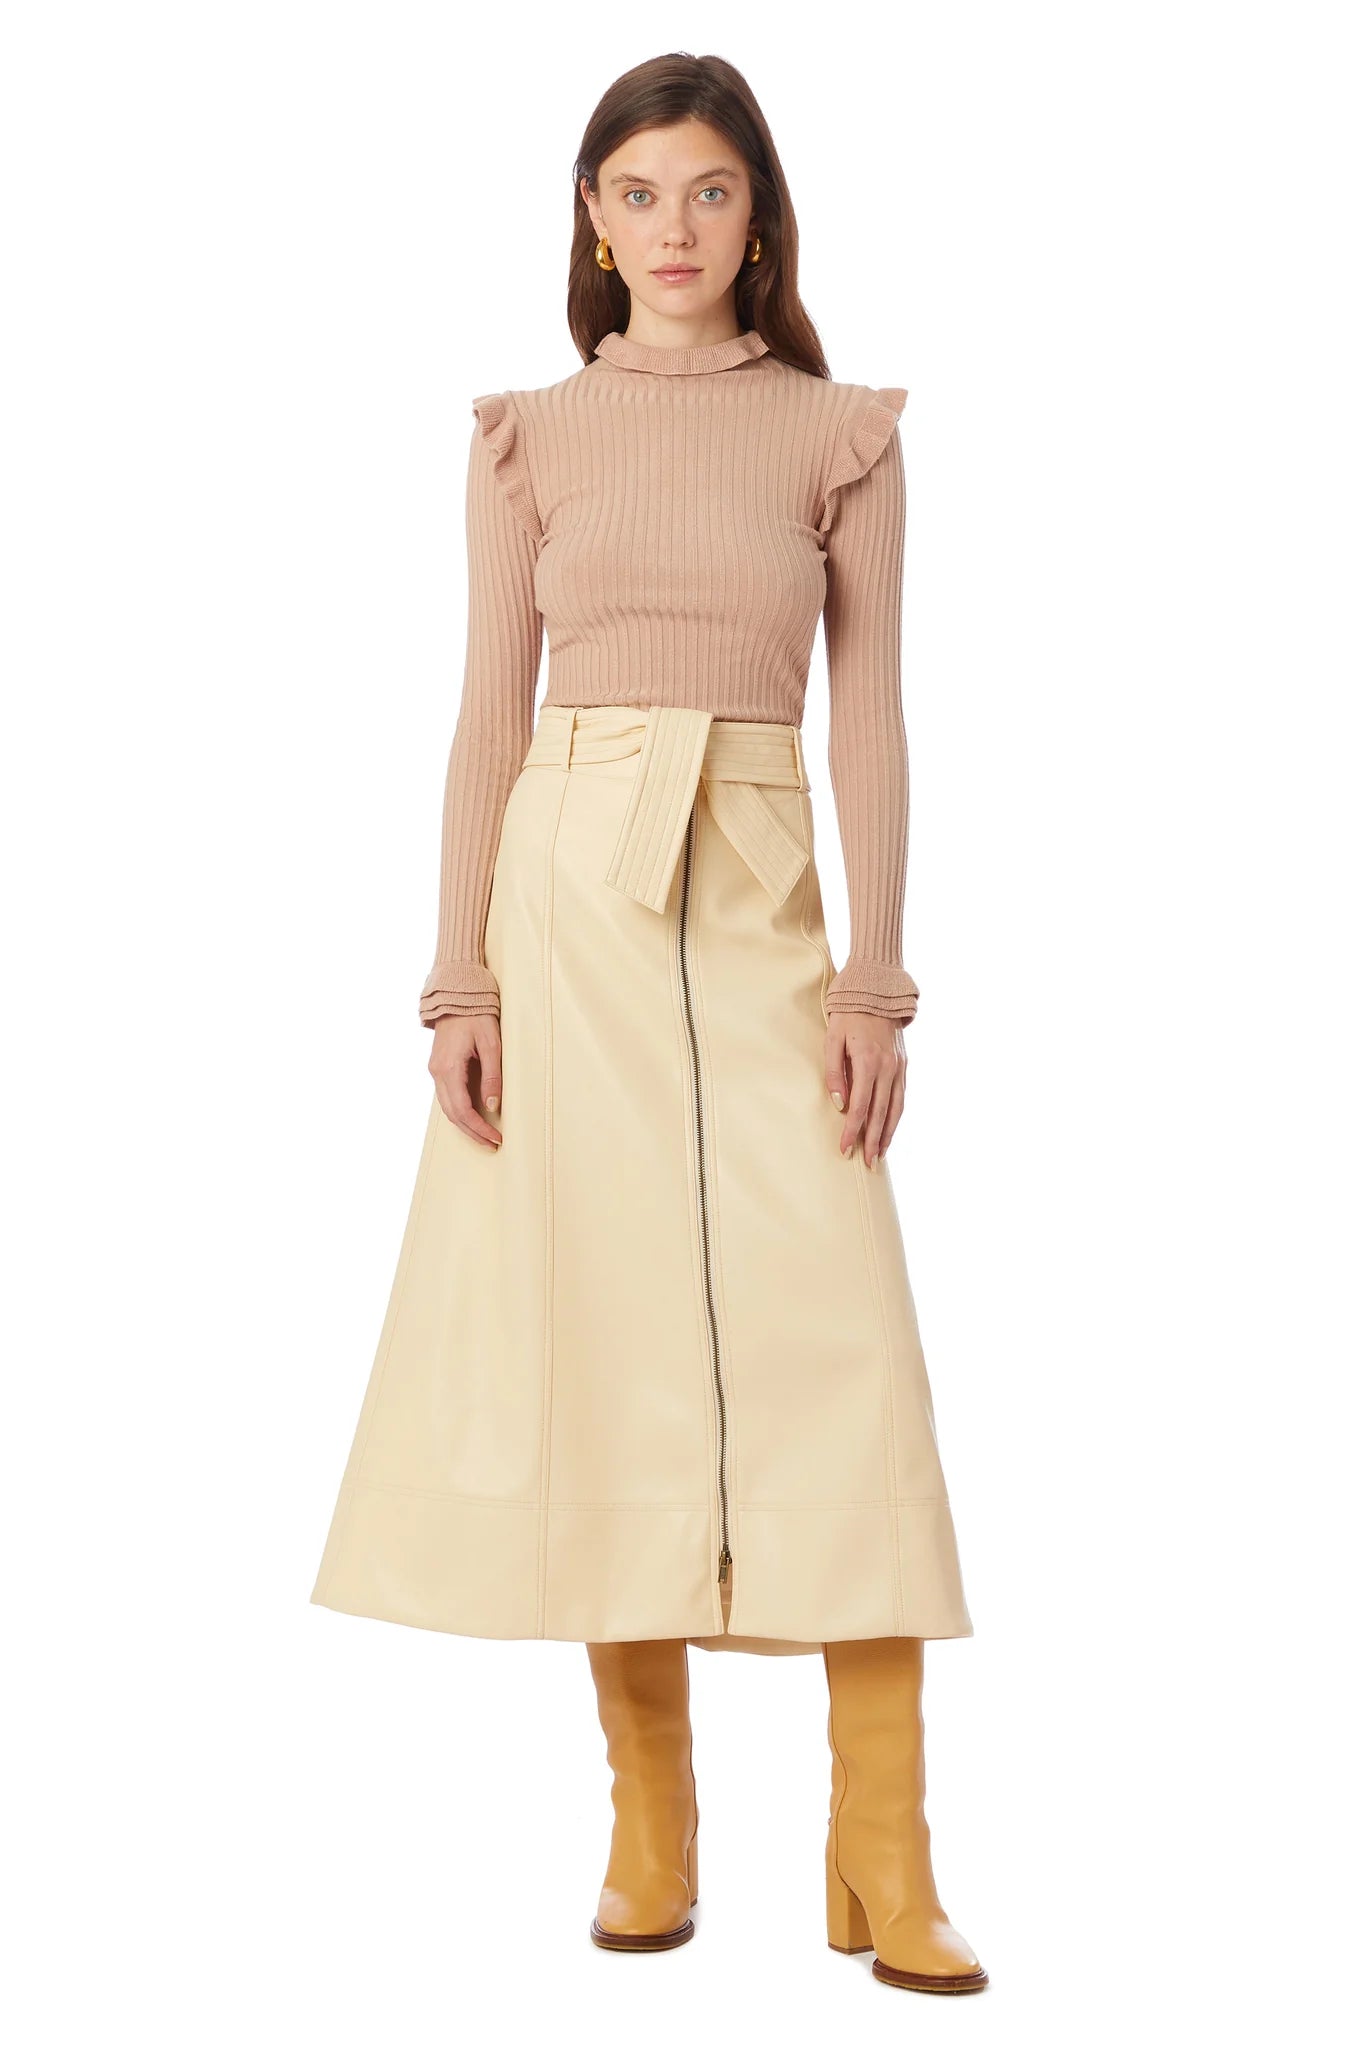 Greenwich Skirt by Marie Oliver in Sand